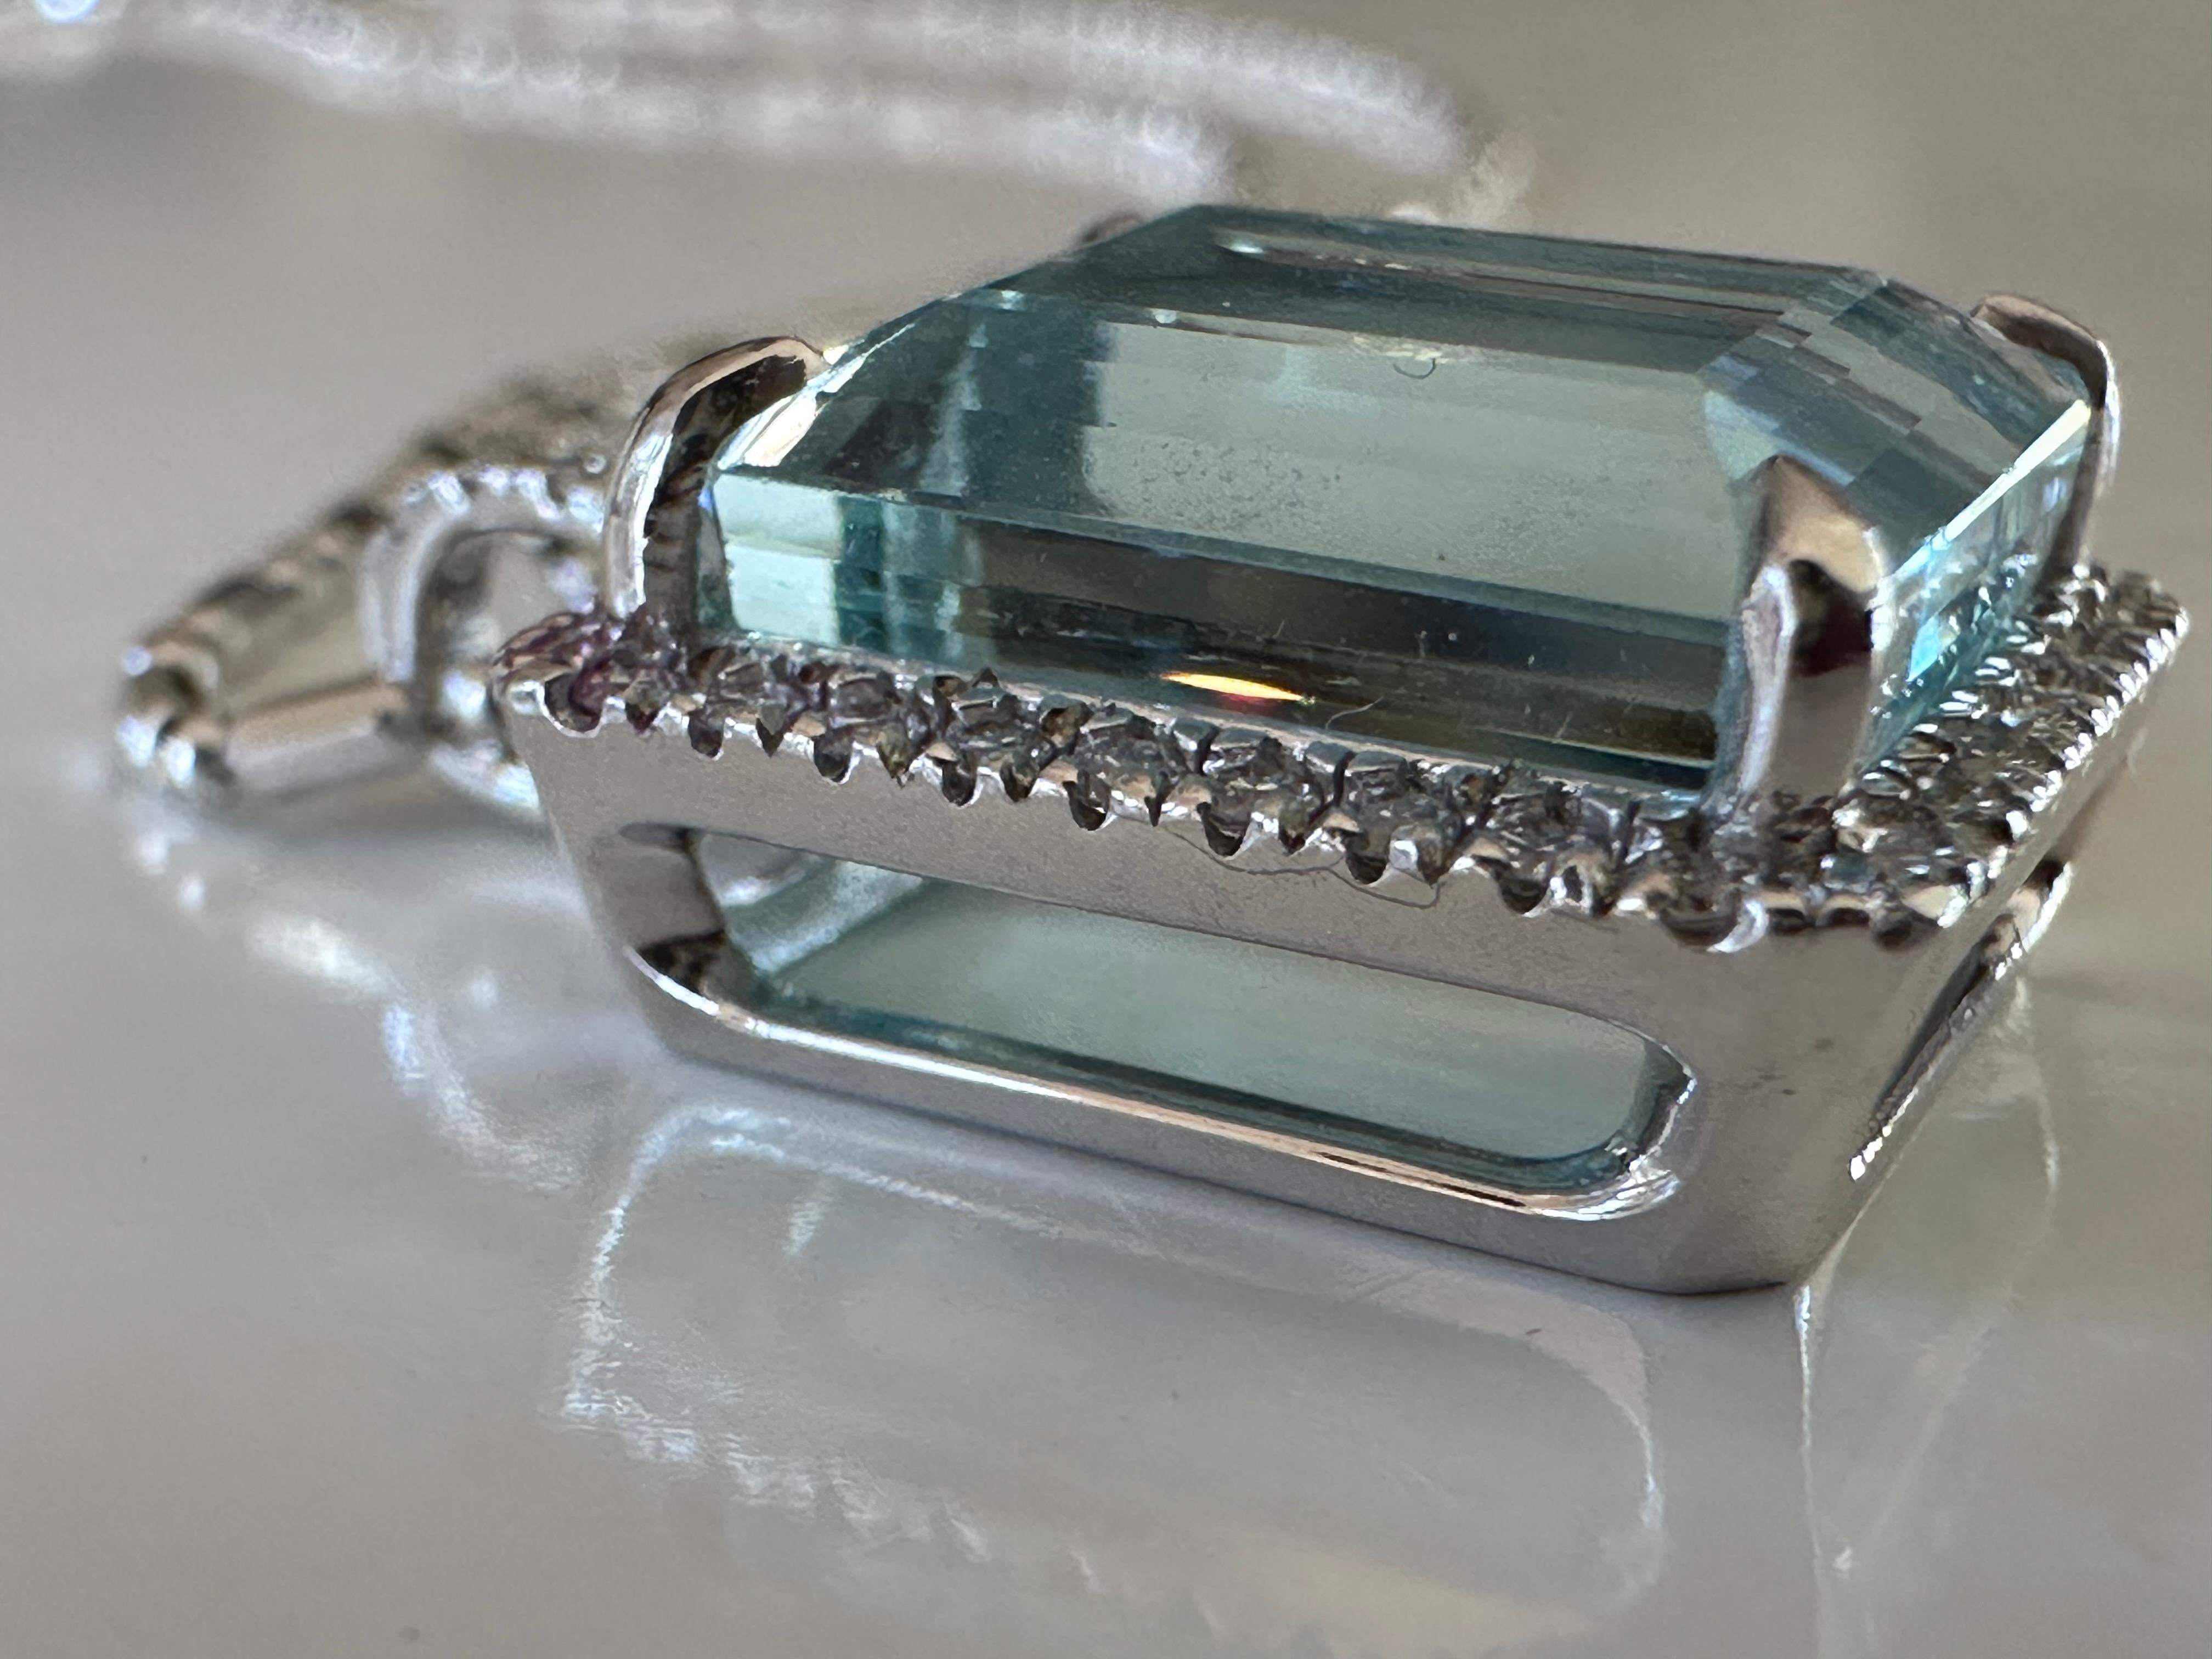 A stunning 9.55-carat emerald-cut light blue aquamarine centers this pendant necklace handcrafted in 14K white gold and surrounded by a halo of forty round diamonds, G color, SI1 clarity totaling 0.34 carats. The necklace measures 18 inches. 
